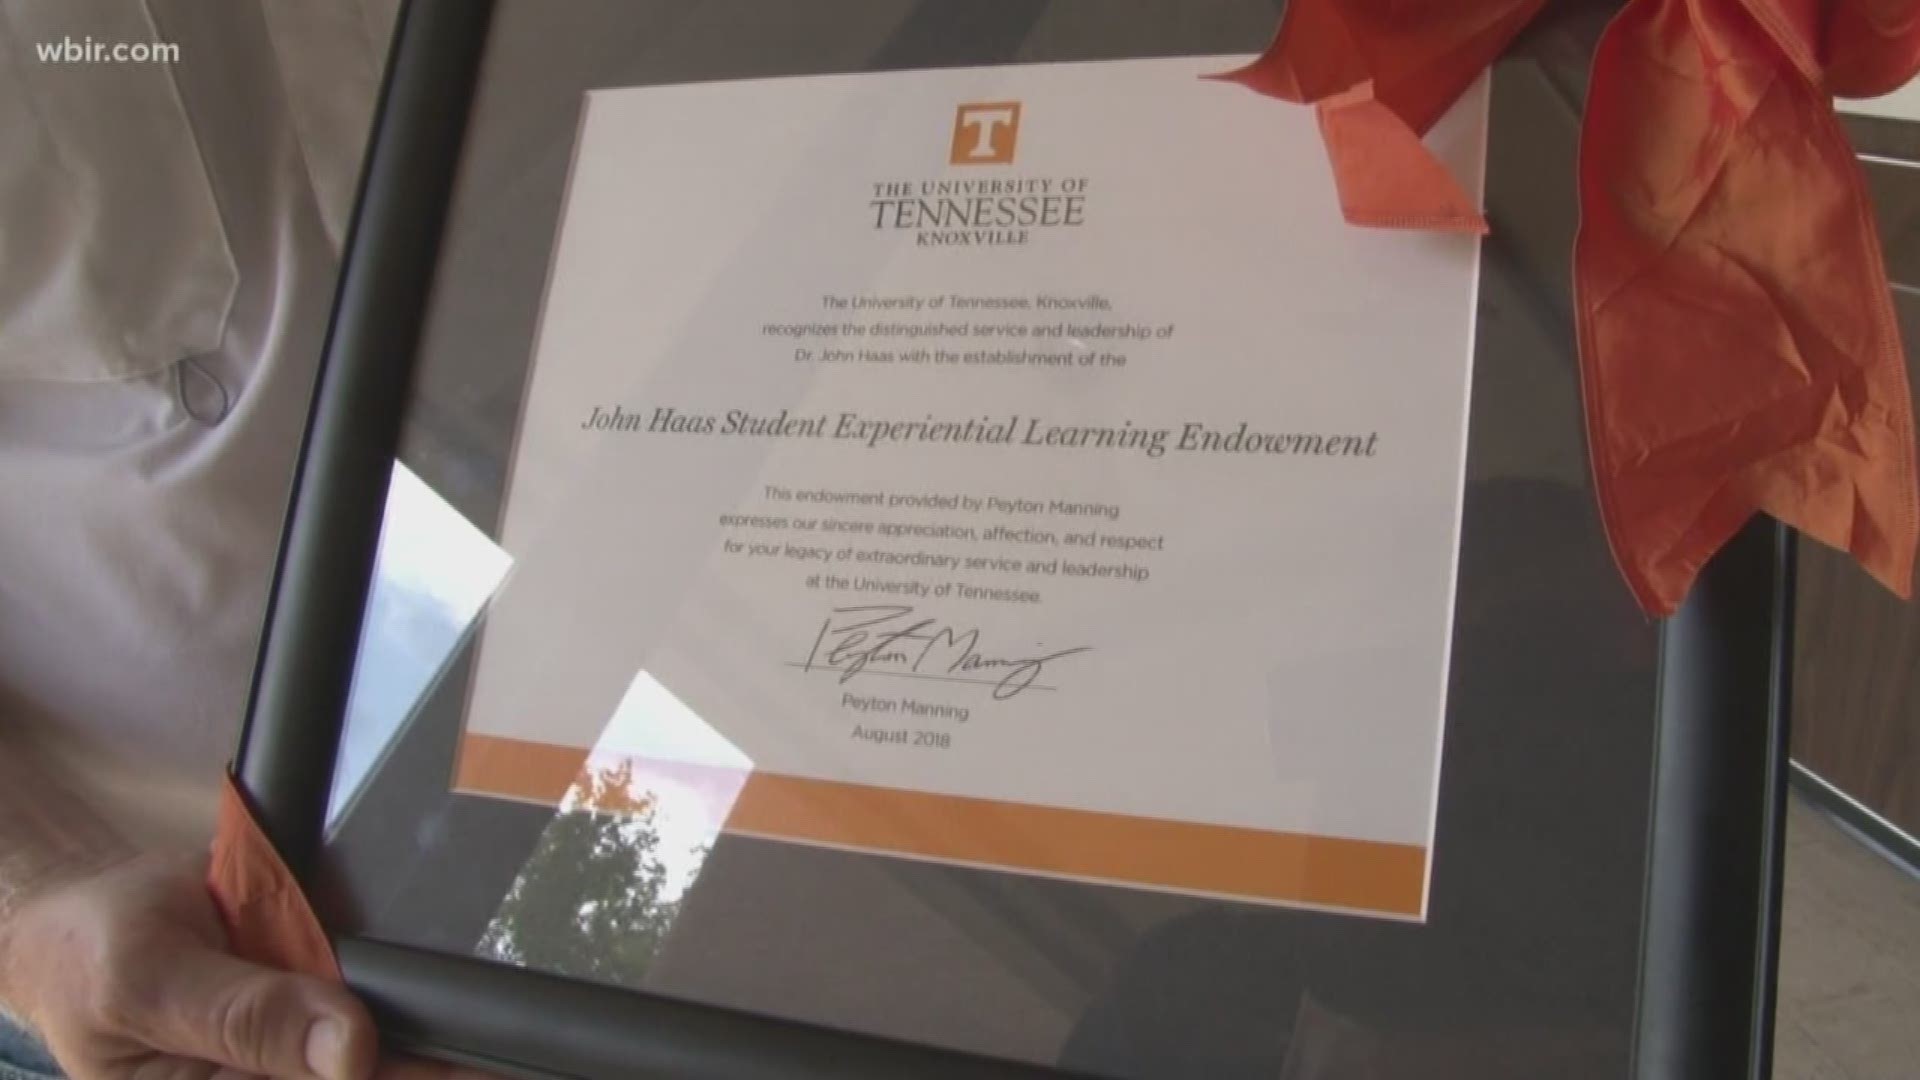 Peyton Manning donated a million dollars to the College of Communication and Information at UT.